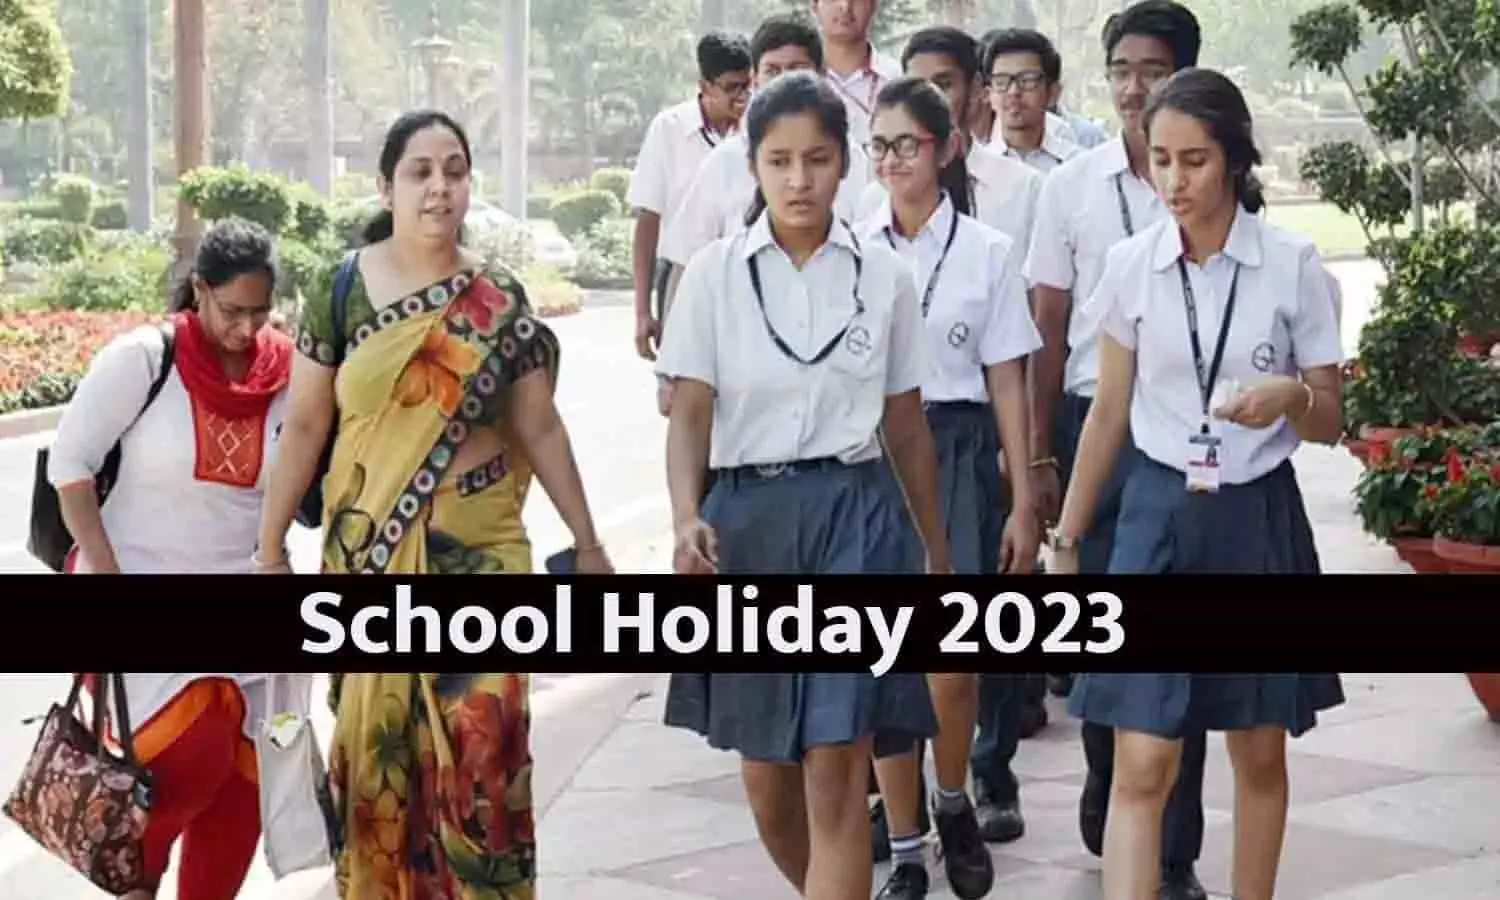 30 August 2023 Holiday In India